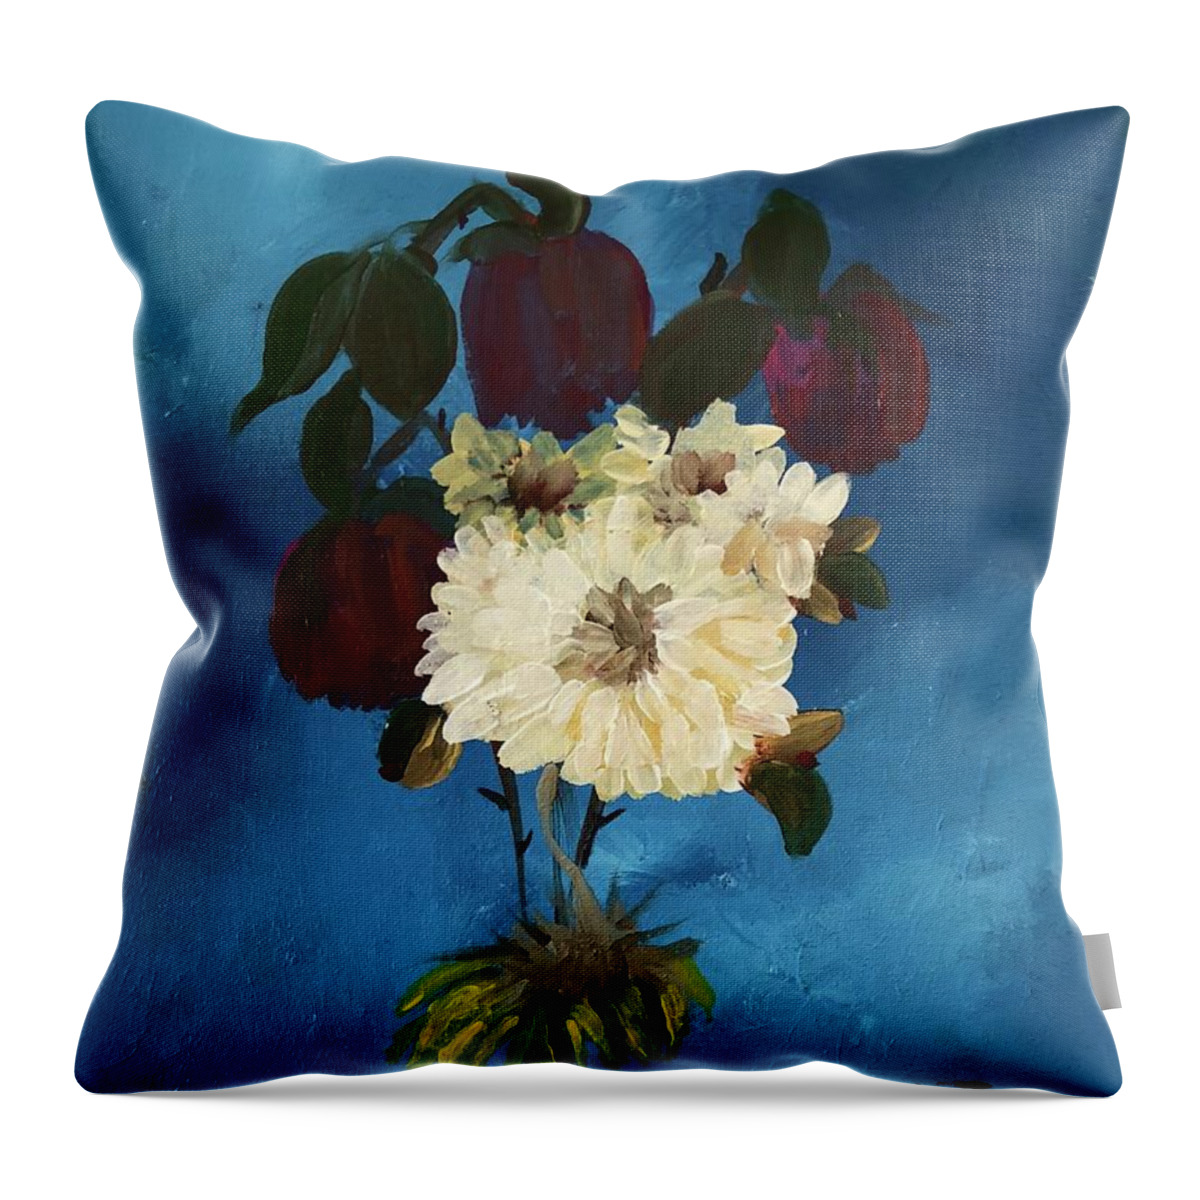 Roses Throw Pillow featuring the painting Dead Flowers Are Pretty Too by Christina Schott